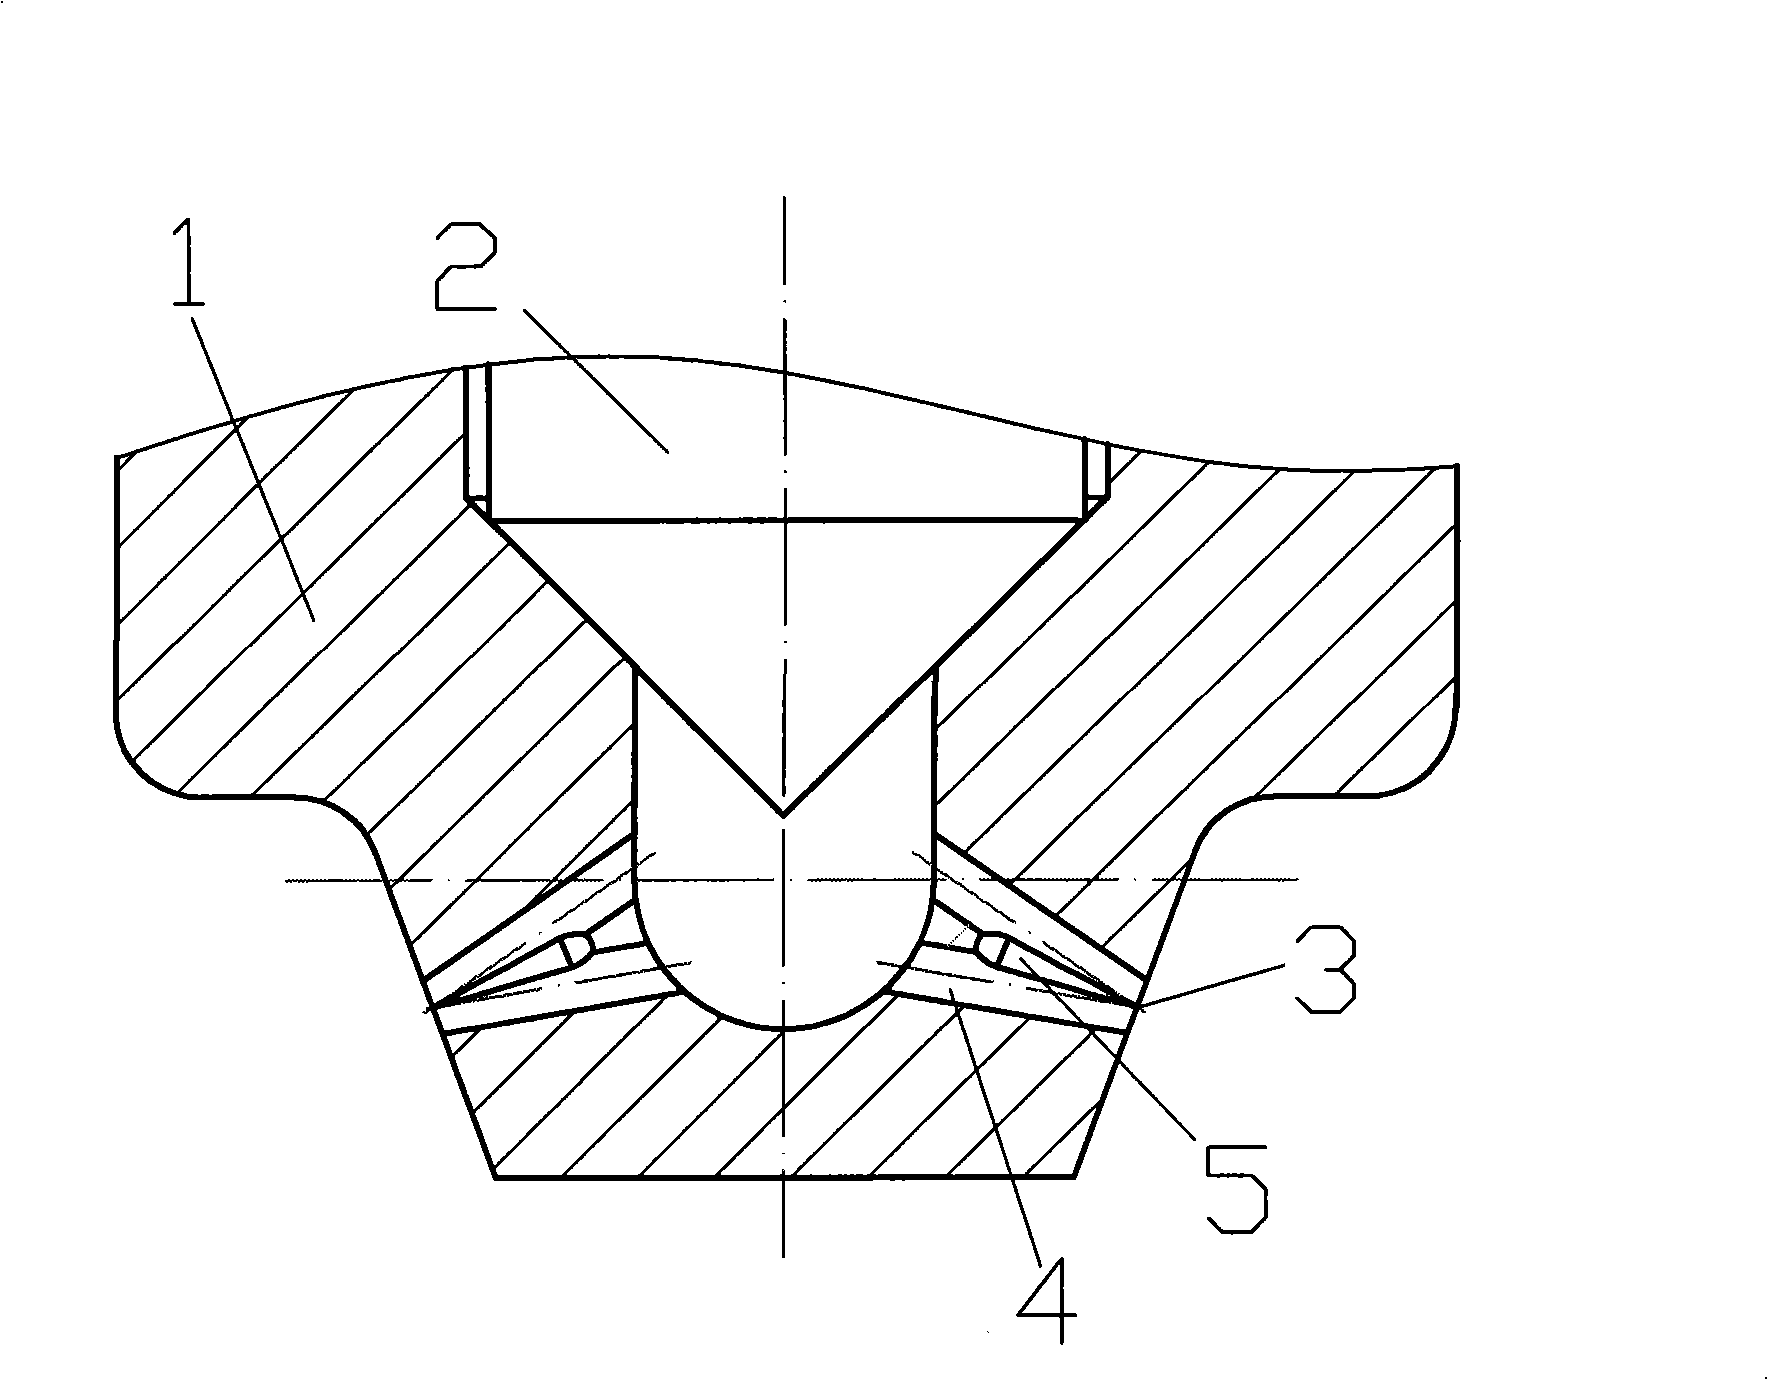 Internal-combustion engine alternating spray hole type nozzle with perturbing zone